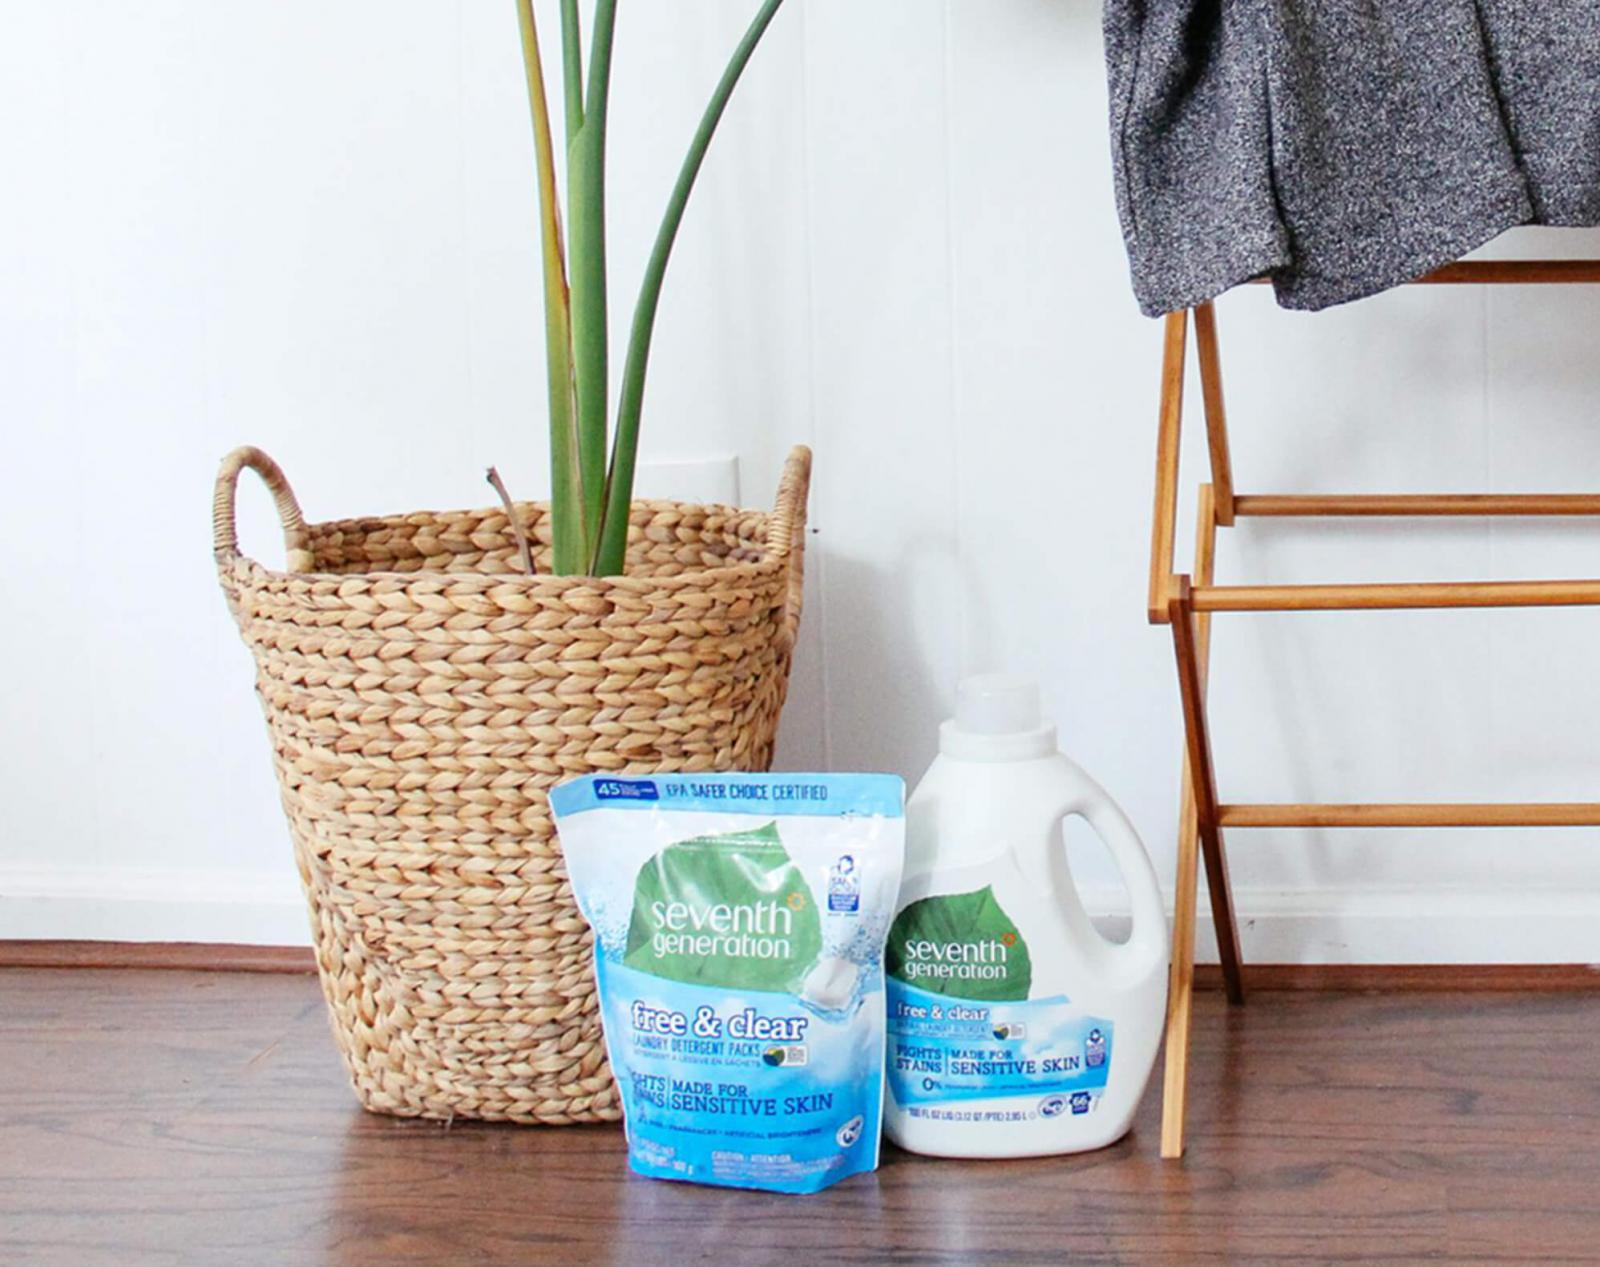 Seventh Generation Laundry detergent with clothes rack